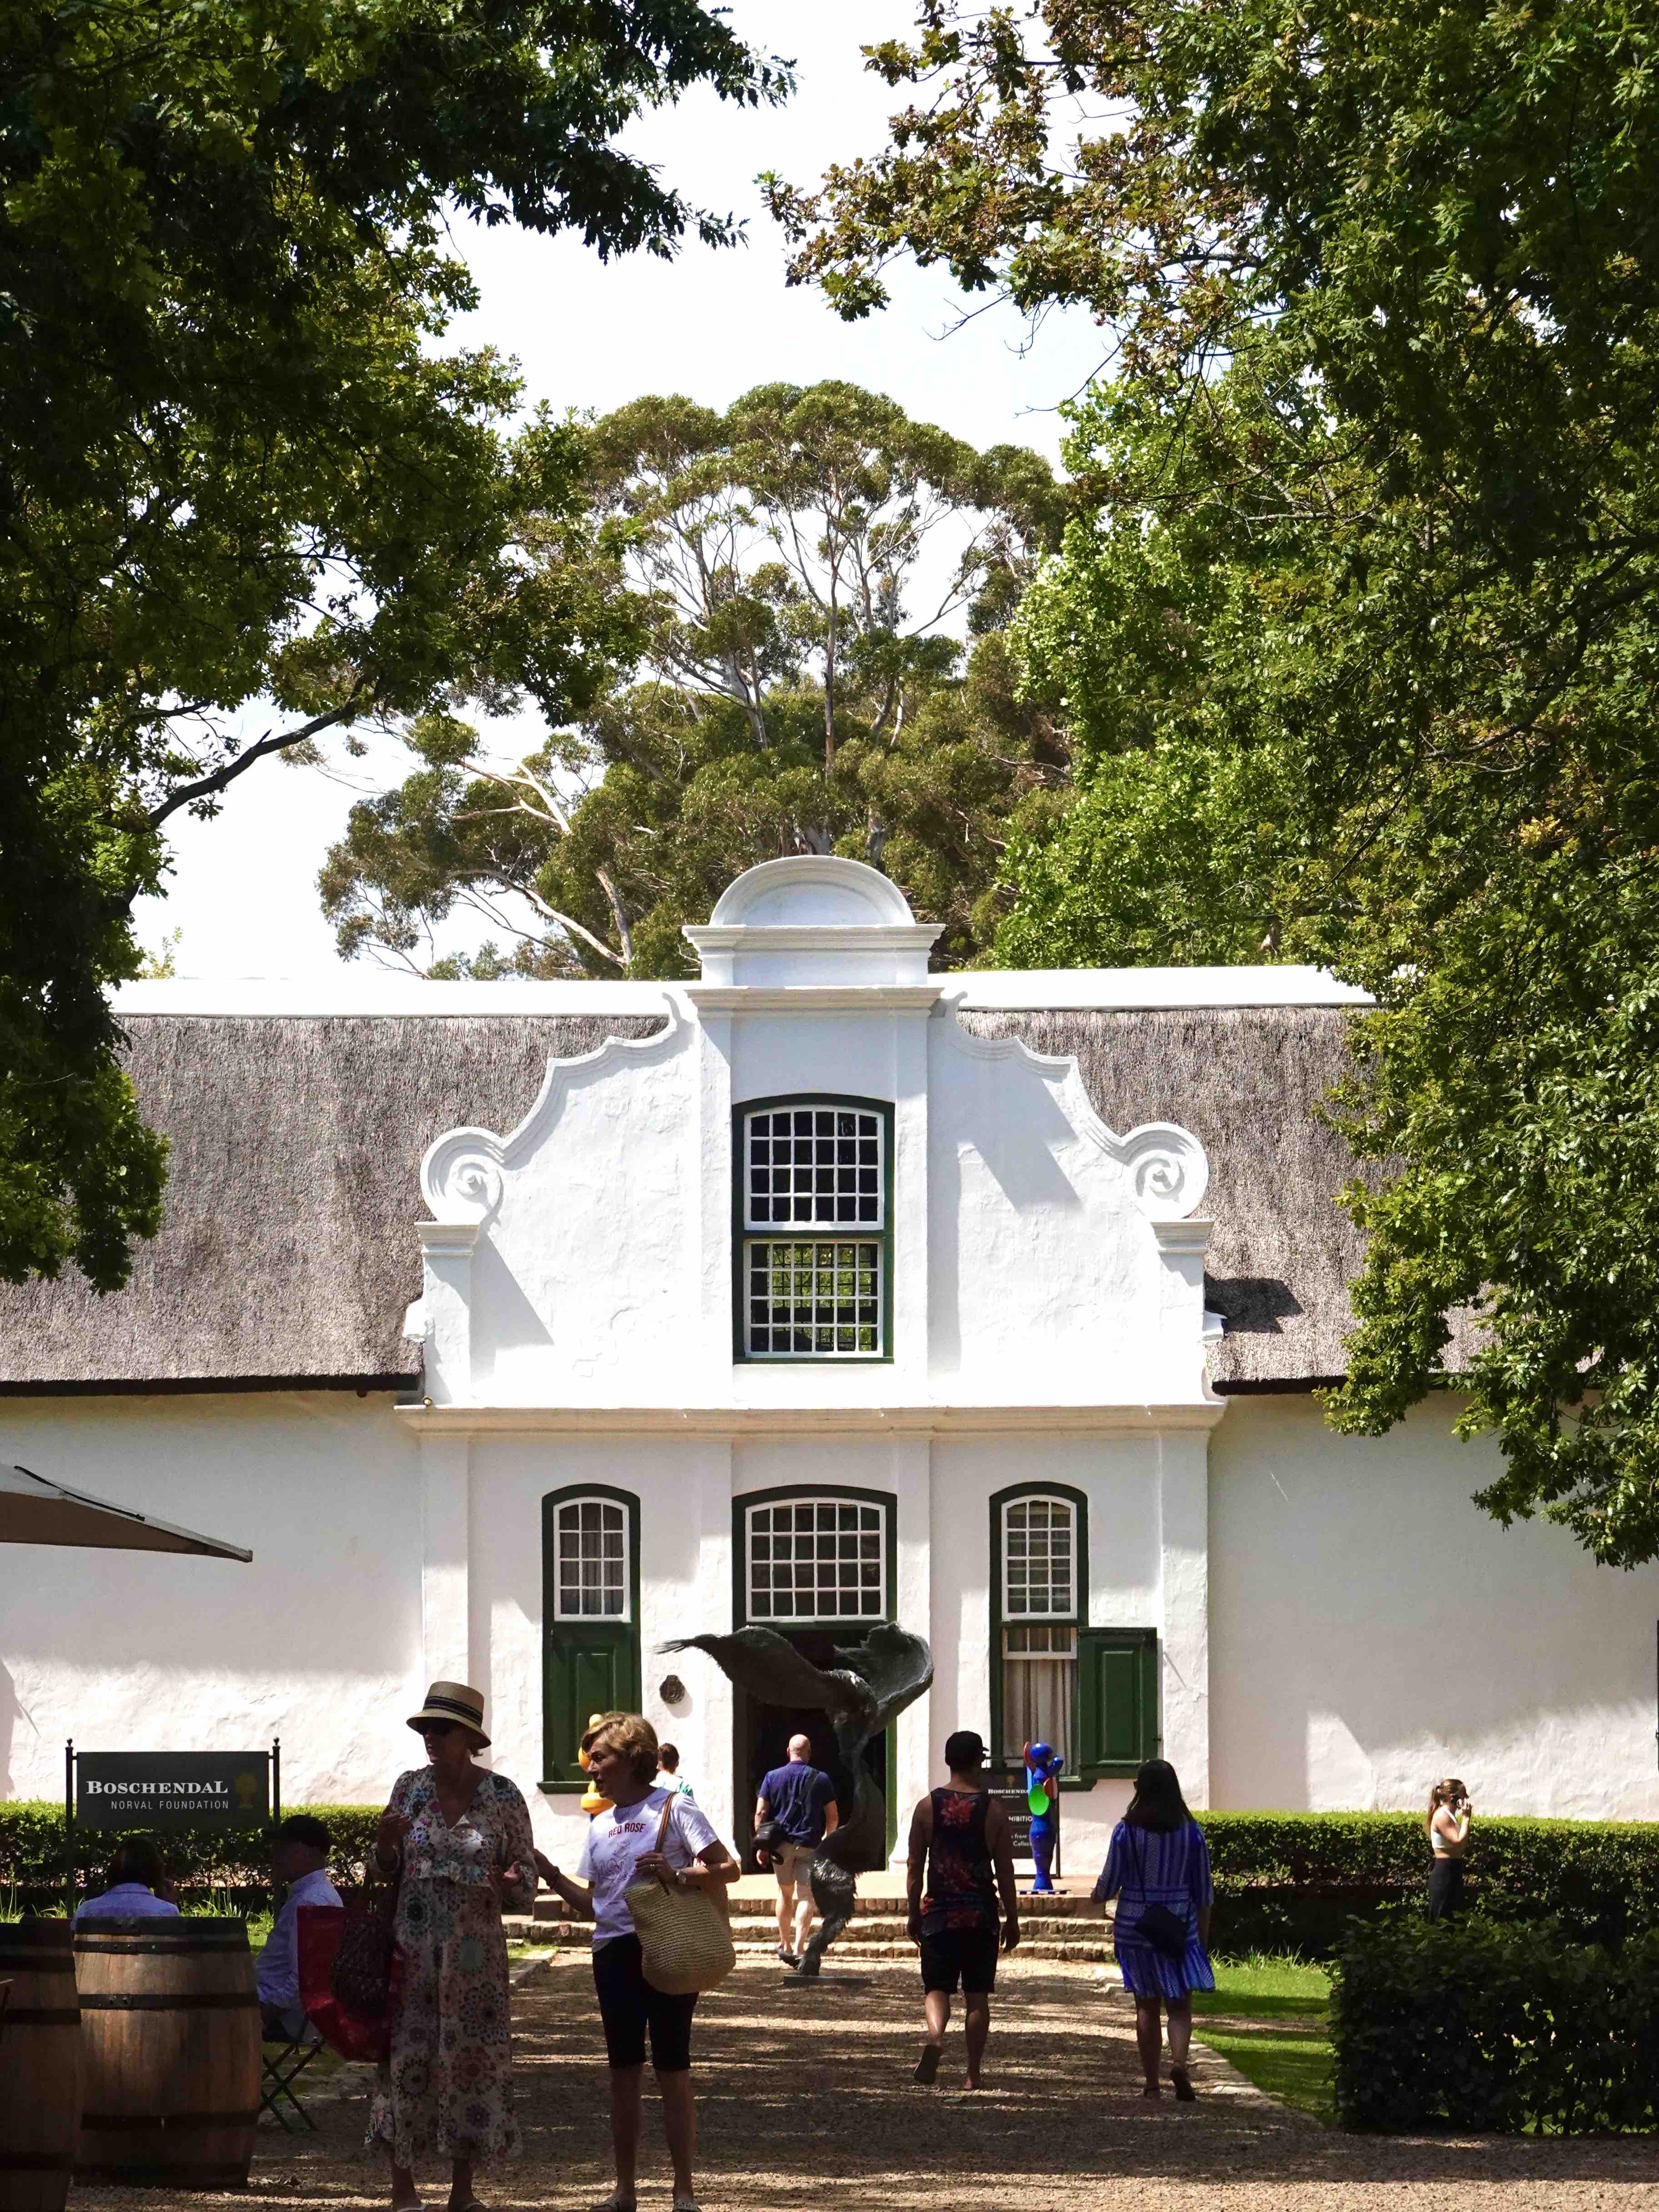 It is worth visiting the Werf, not only for its food but also to experience the Boschendal Estate.